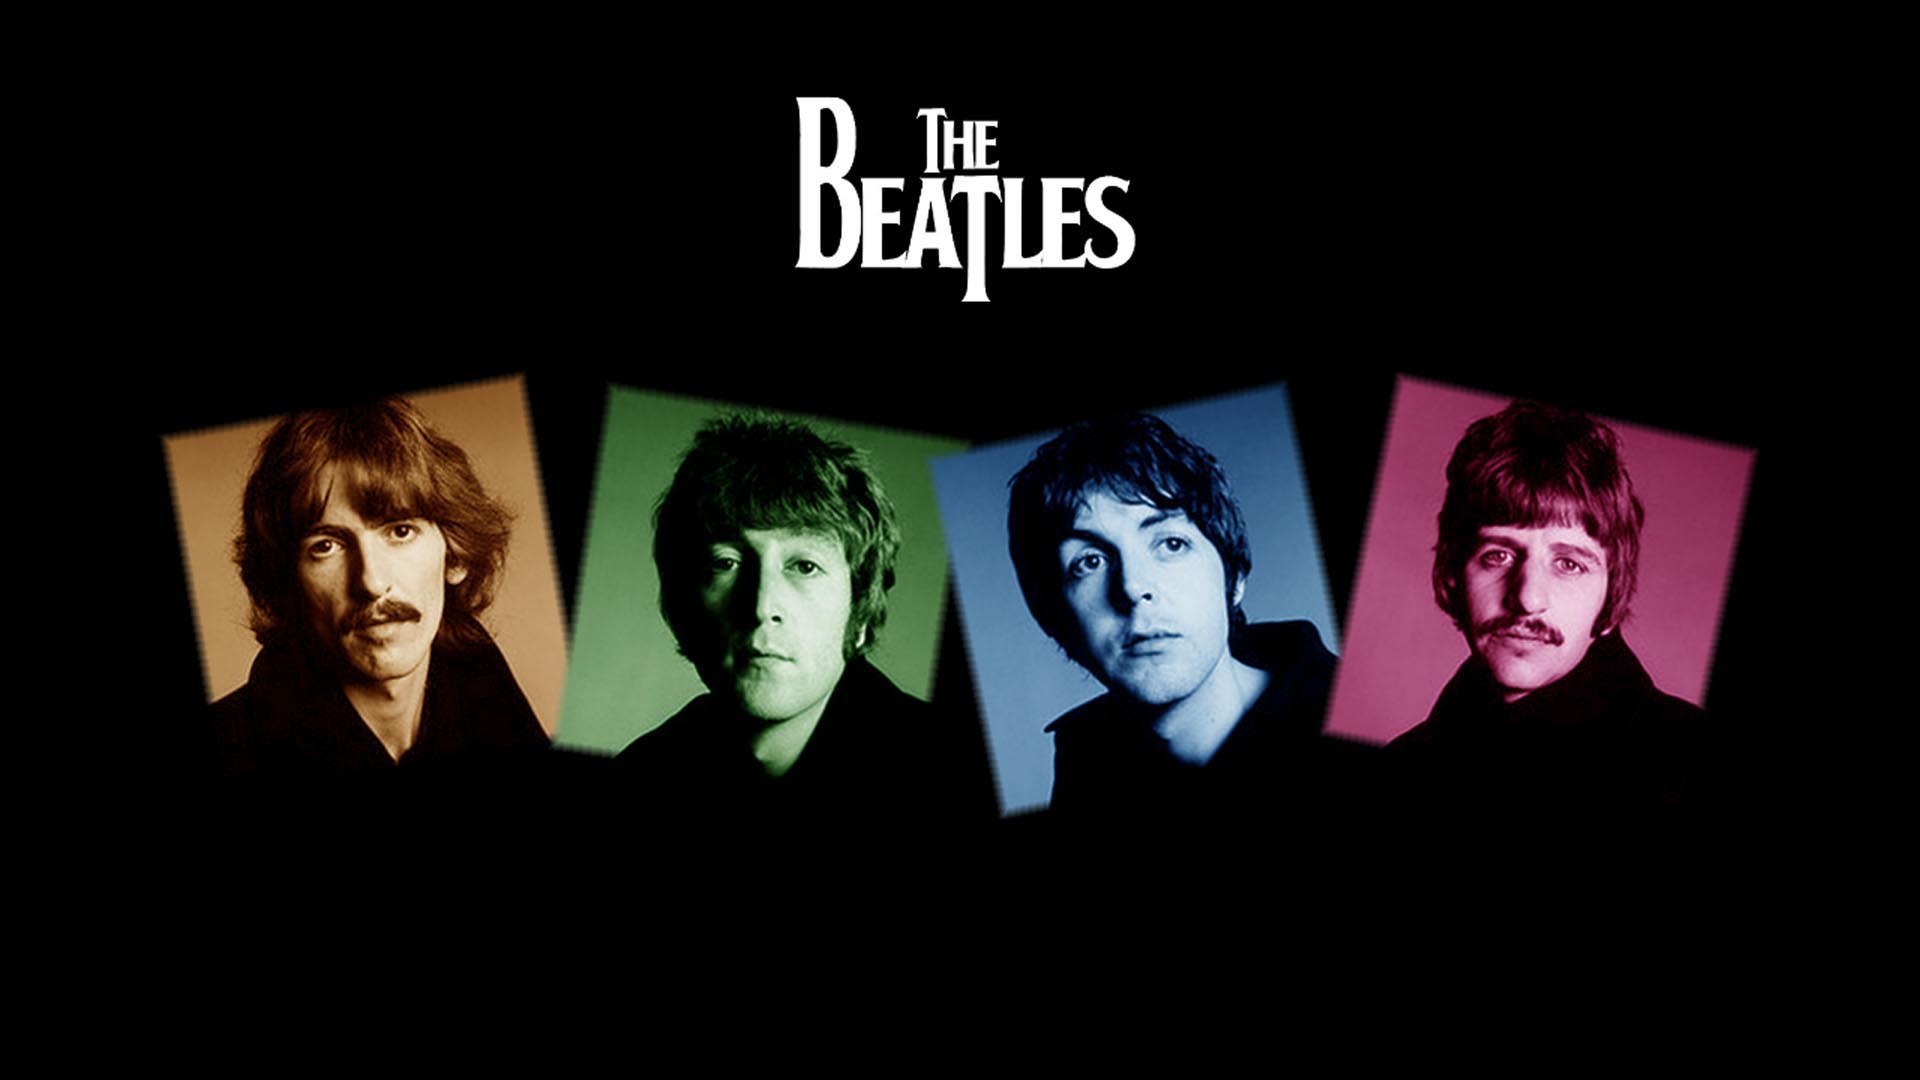 The Beatles Wallpaper Iphone 62 Images